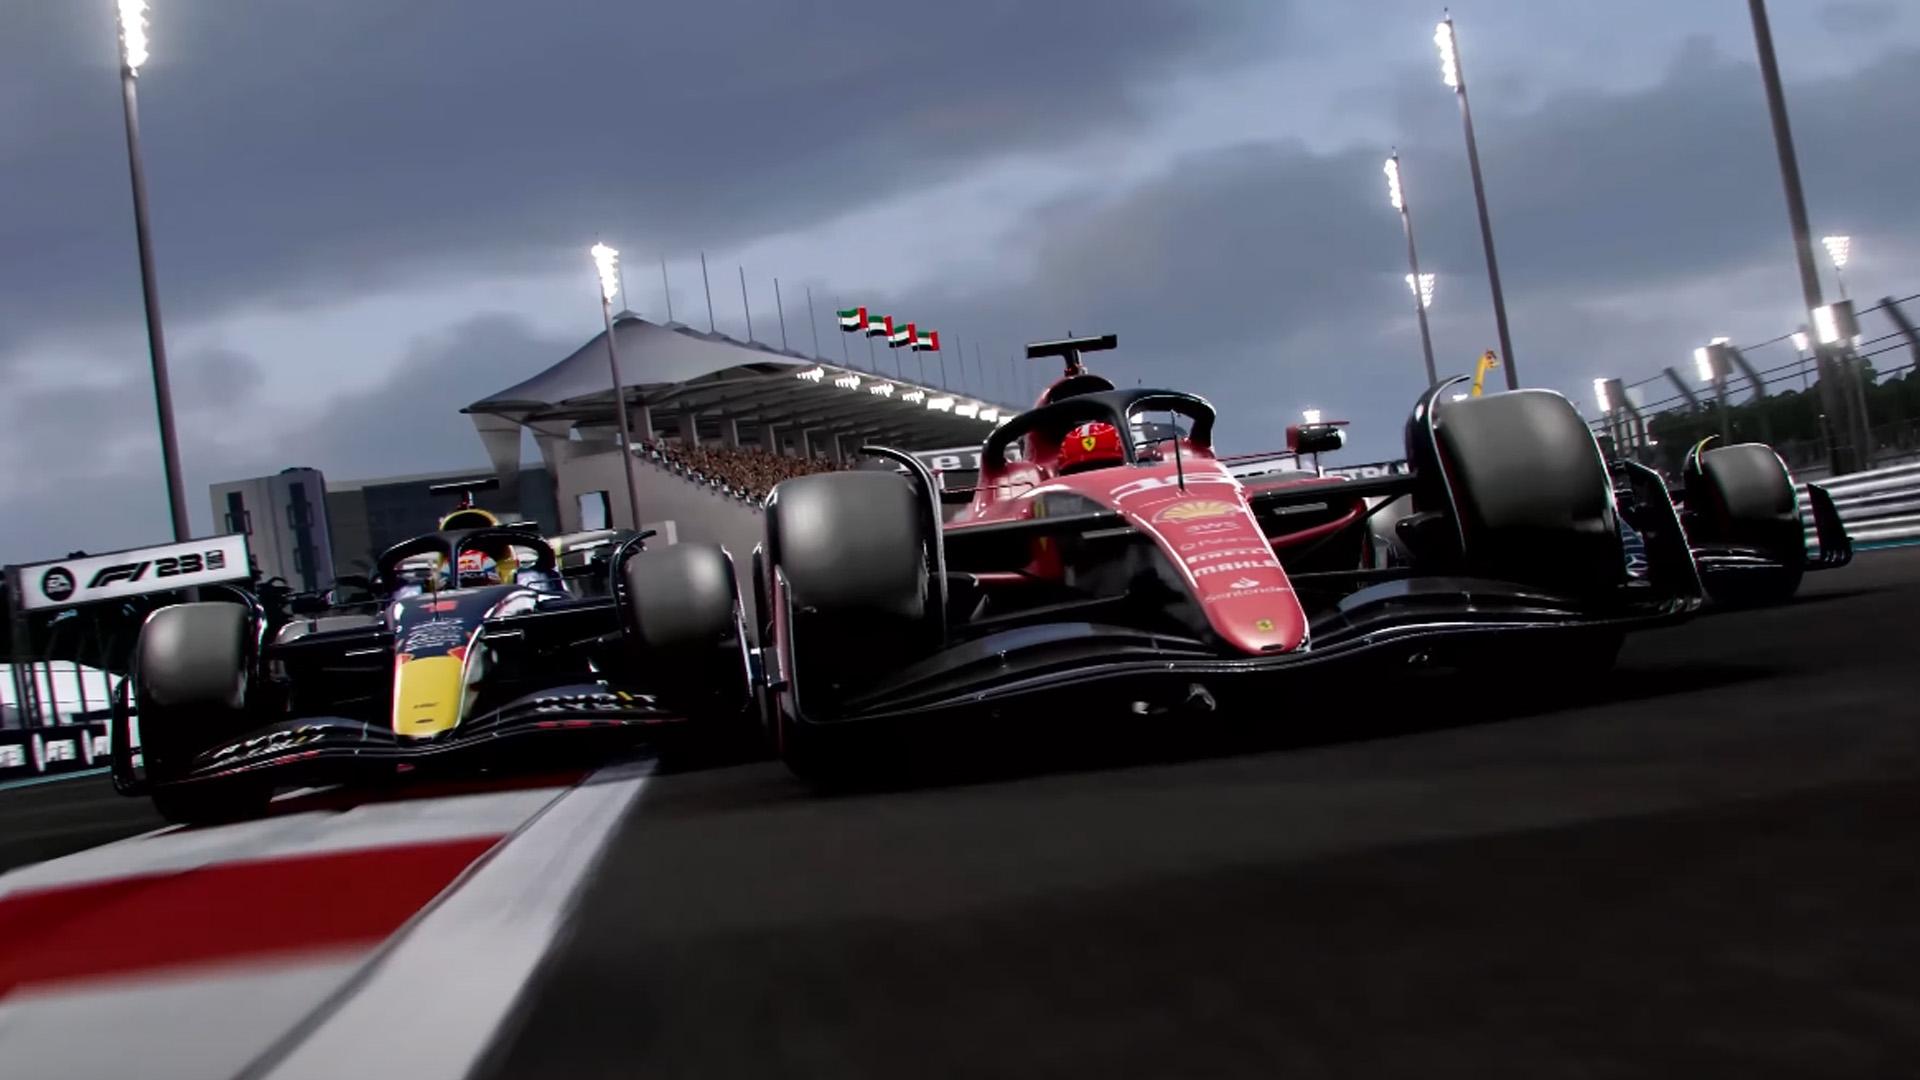 F1 23 Details Include New F1 World Hub, Car Upgrades, And More - Insider  Gaming